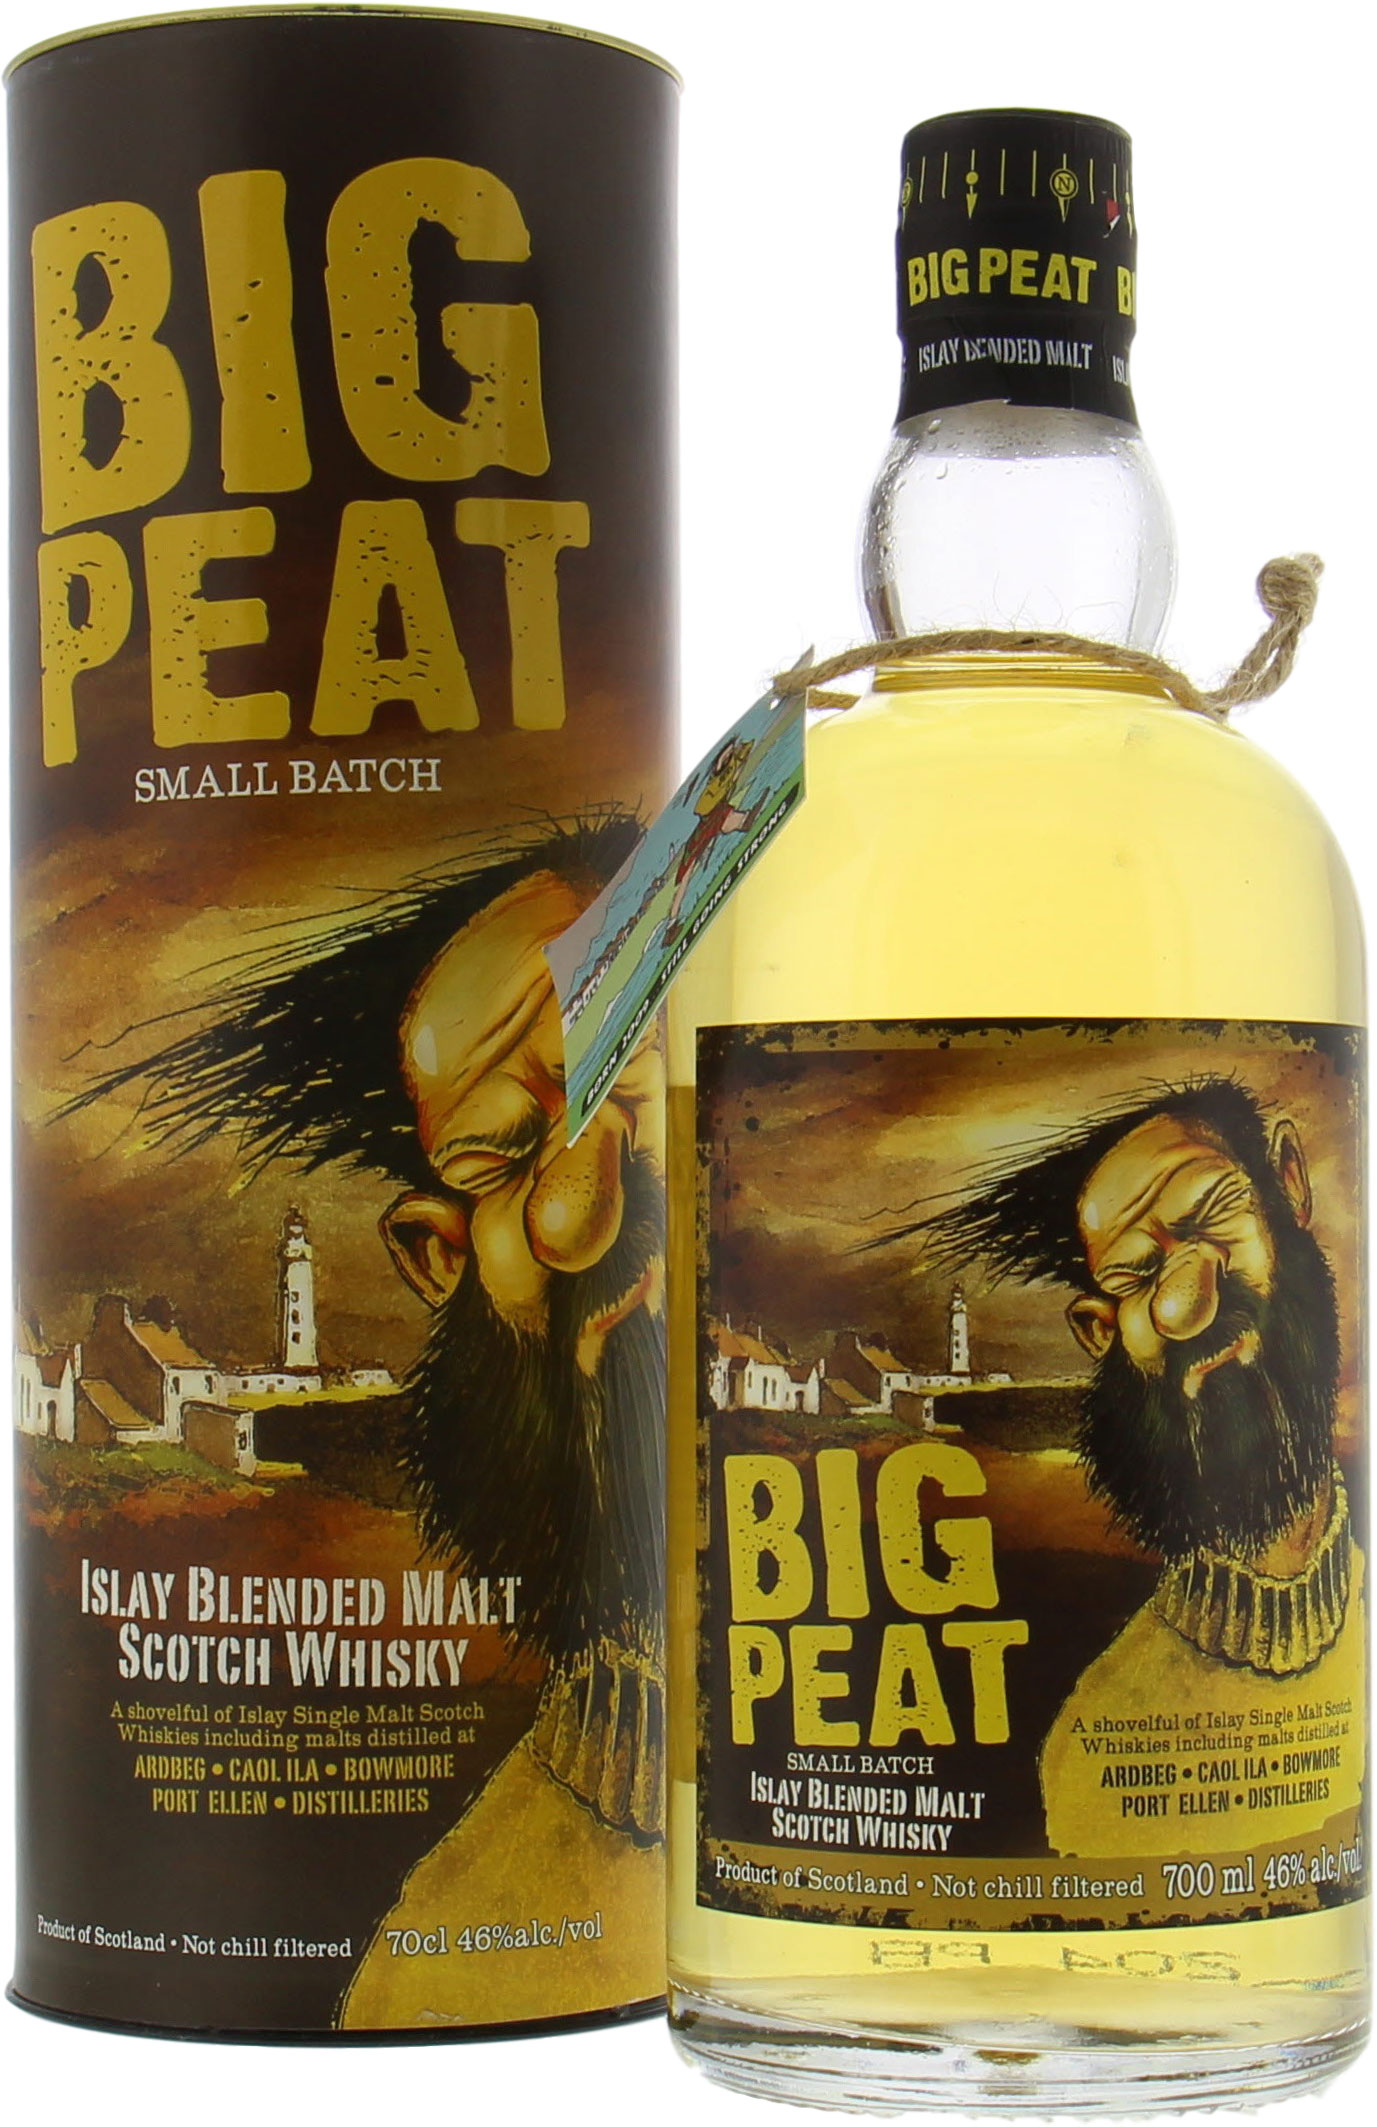 Big Peat - Small Batch 52 46% NV In Original Container